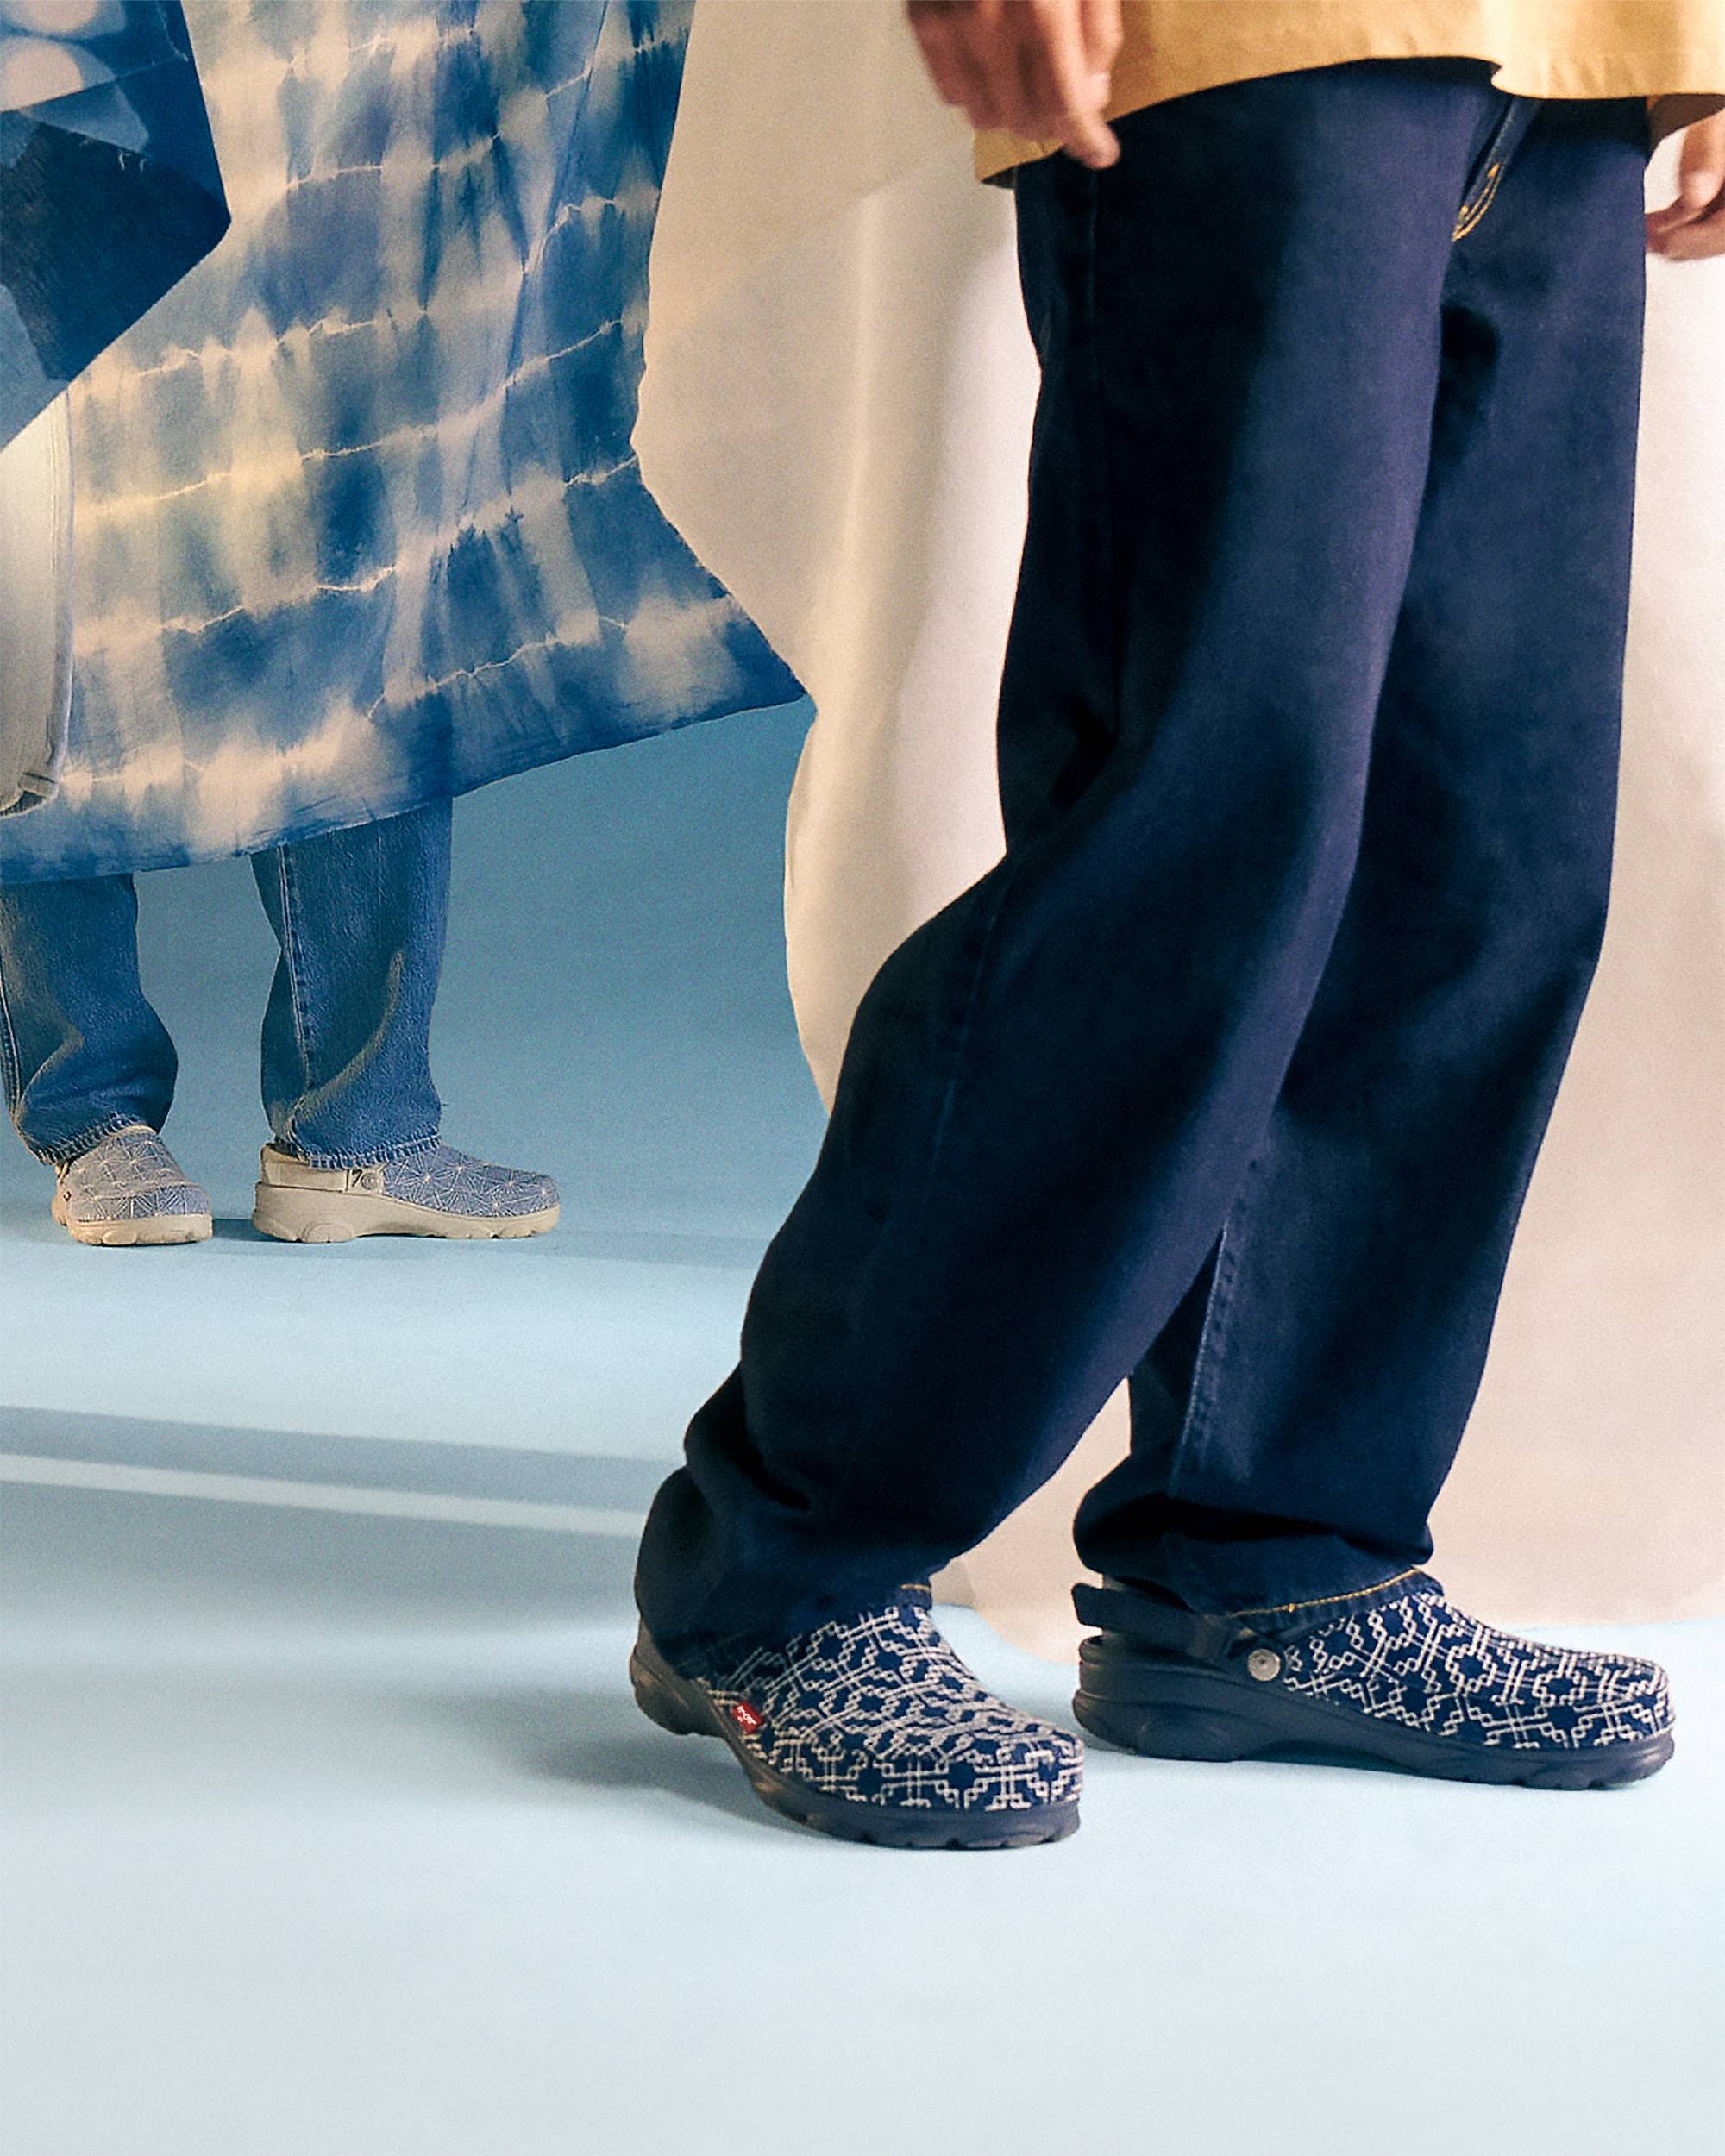 Levi's x Crocs shoes made out of denim on a person with jeans on with a blue background.